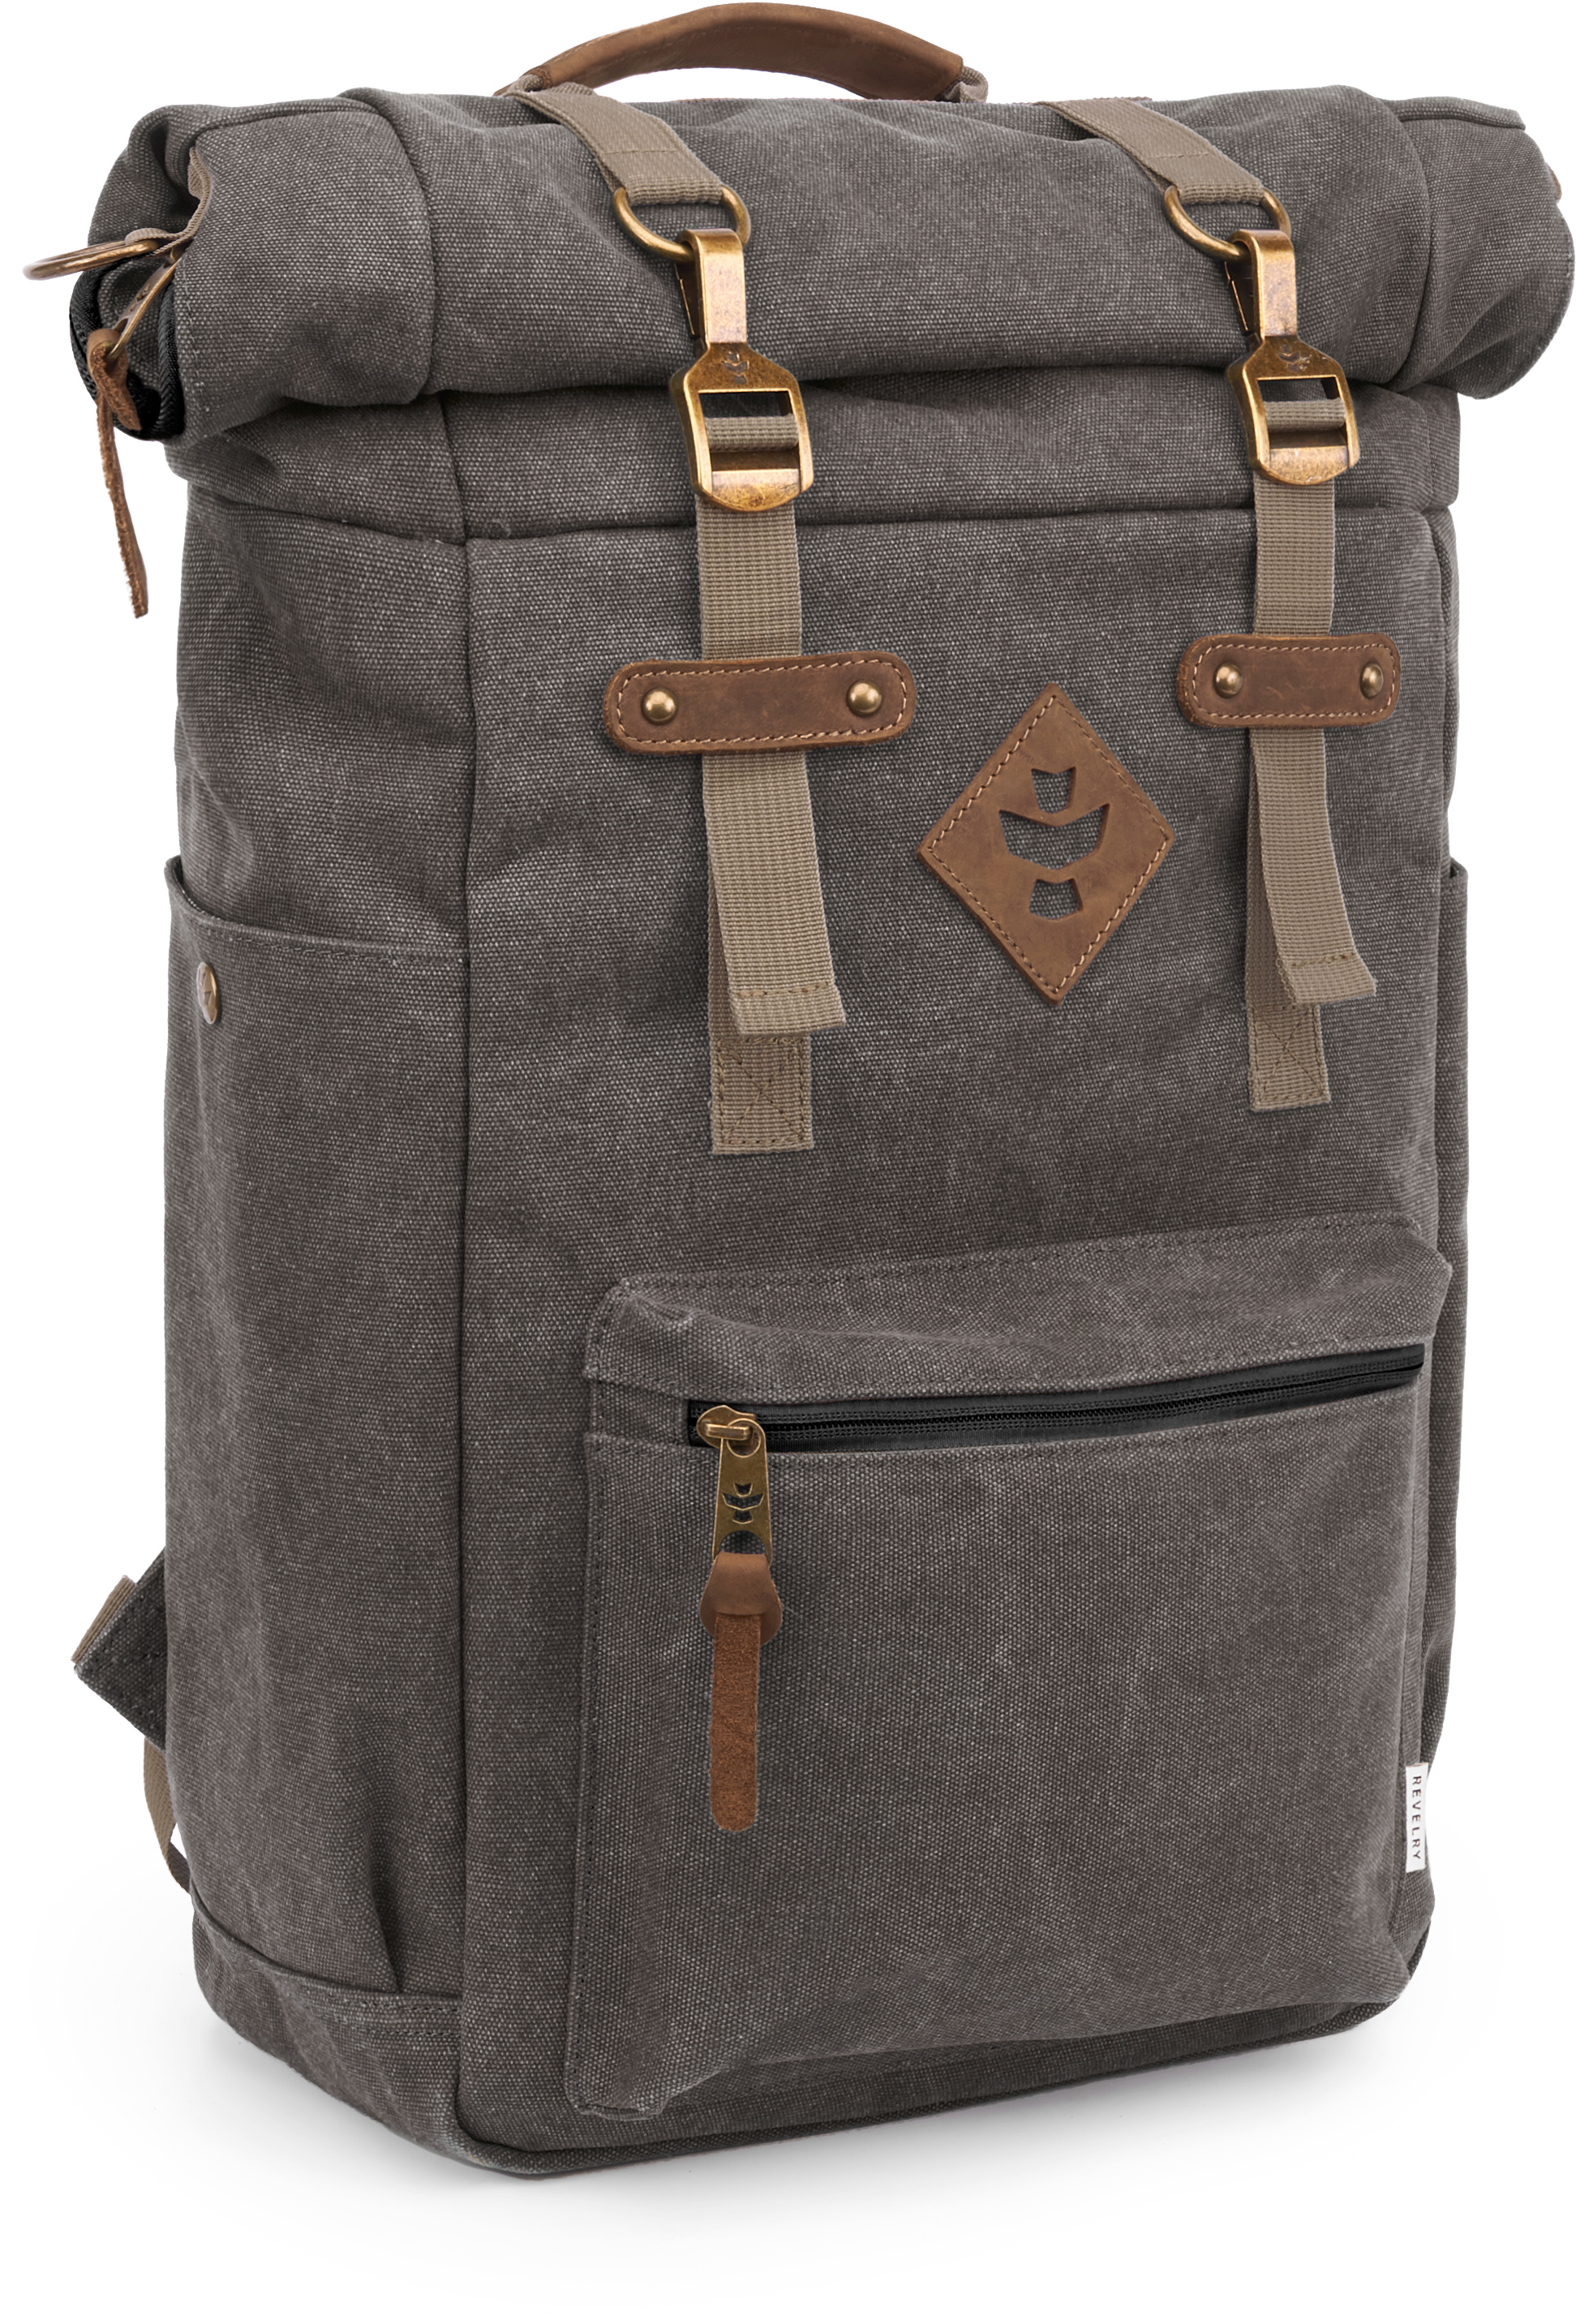 Picture for Revelry Supply The Drifter Rolltop Backpack, Ash